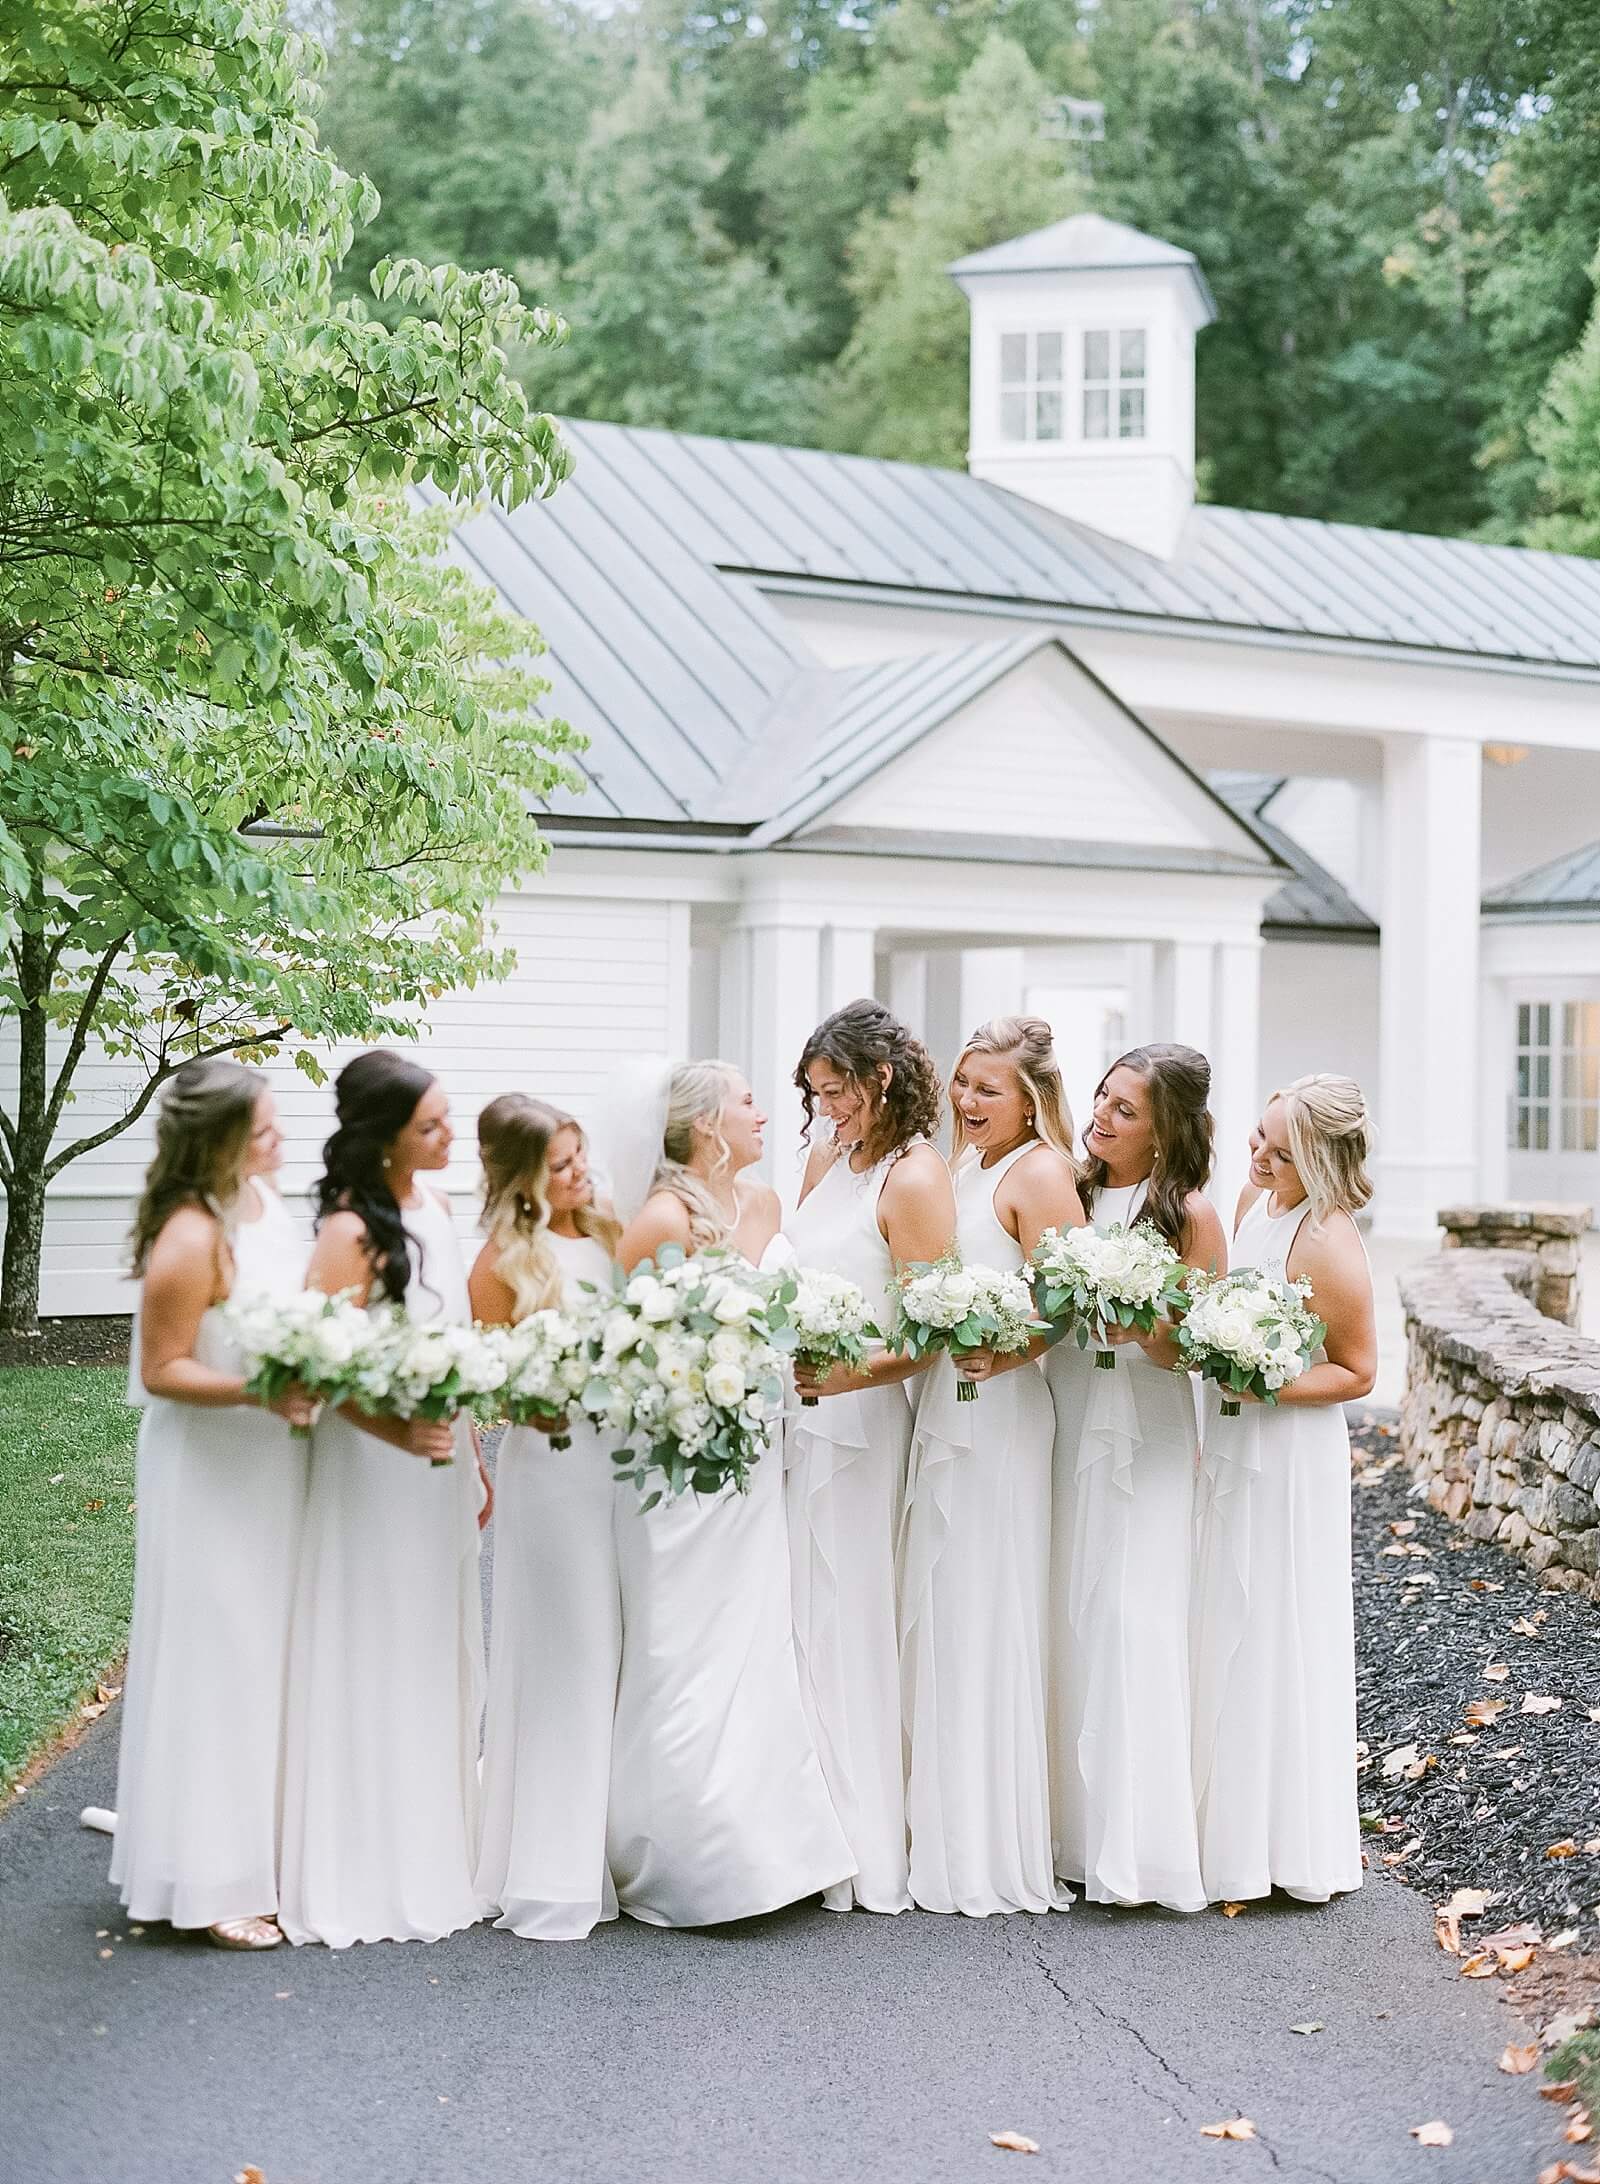 Bride with her bridesmaids in white dresses during her wedding at Trump Winery